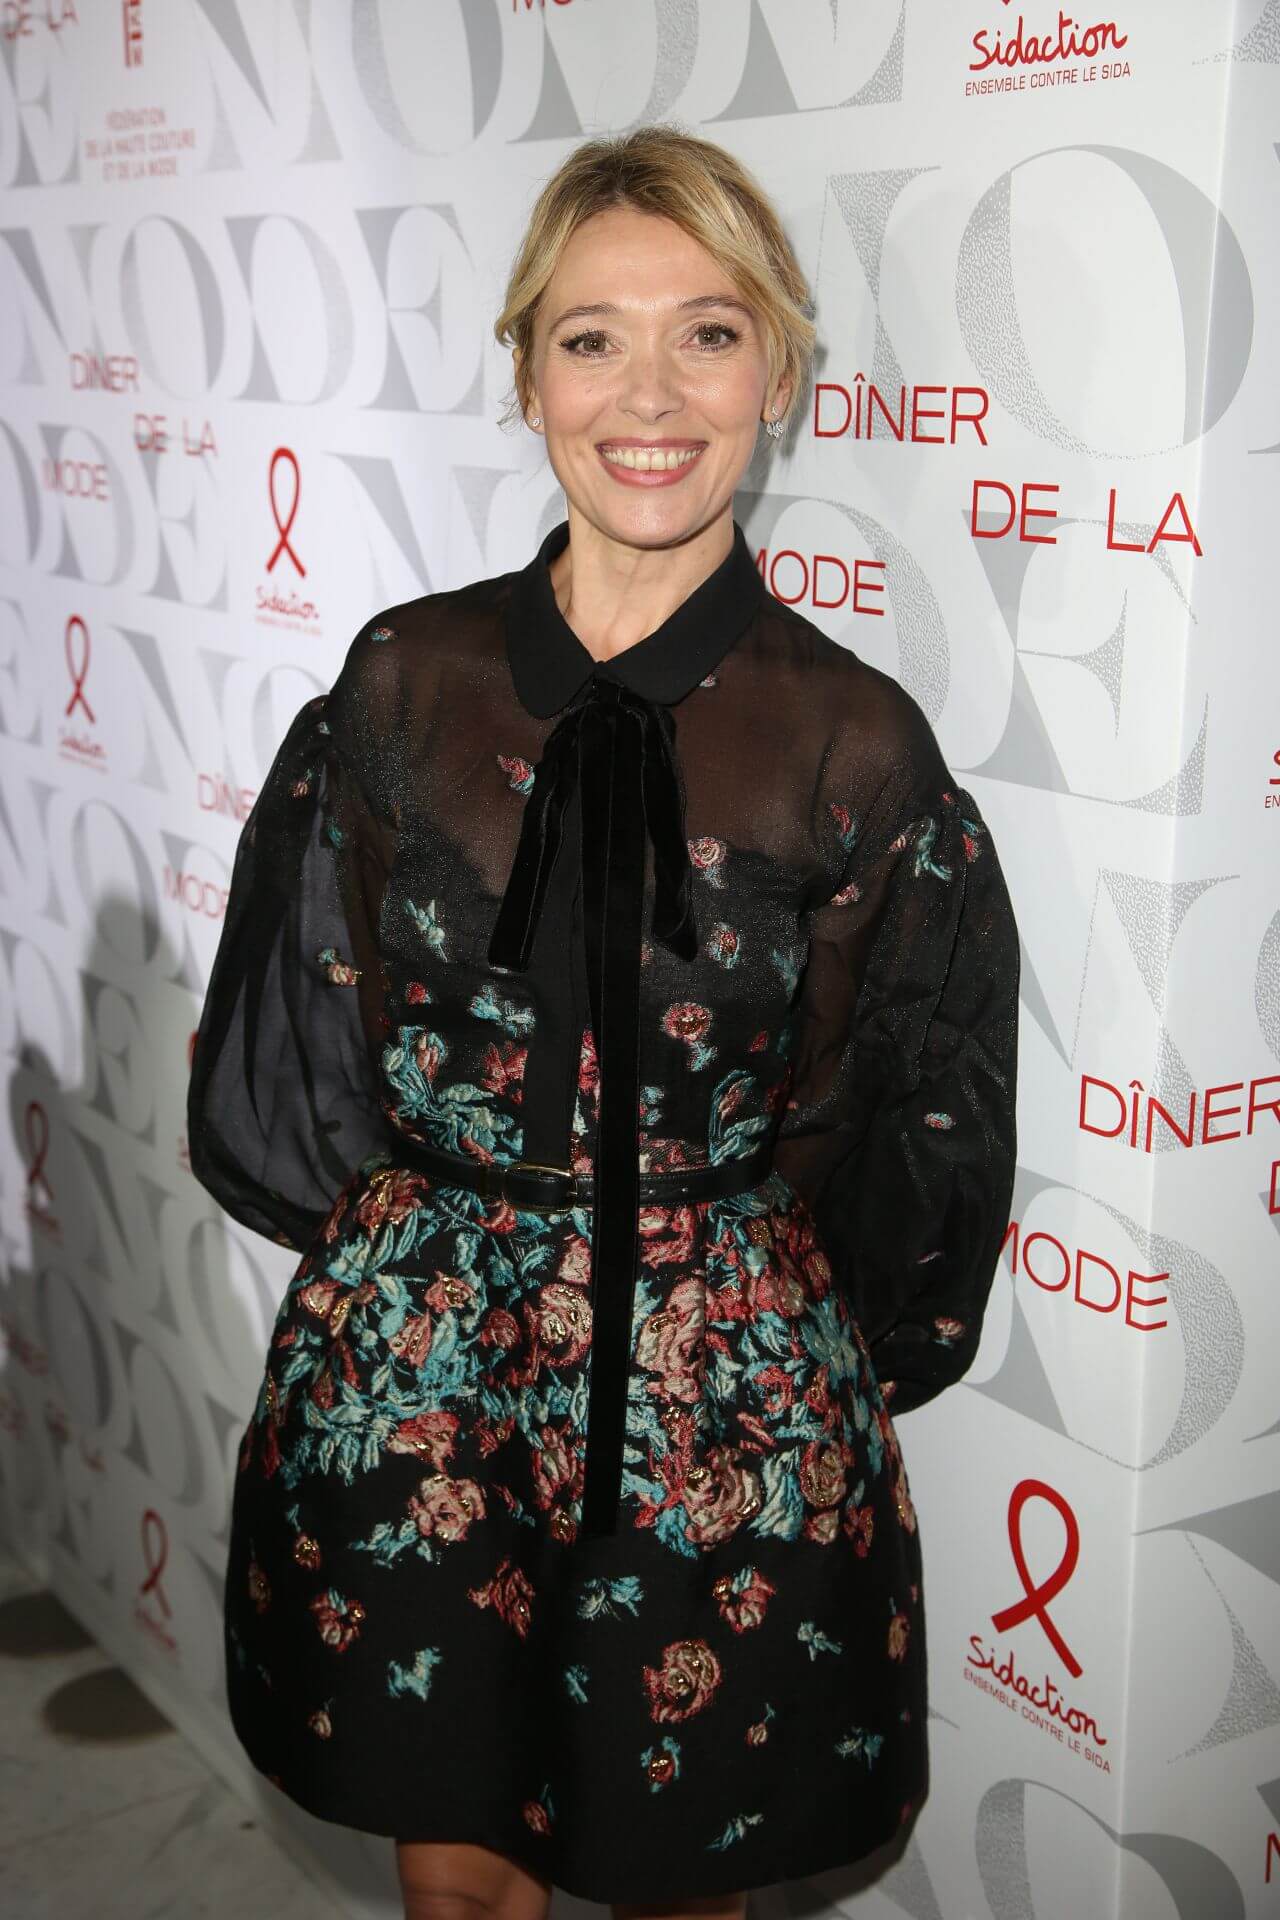 Anne Marivin  In Black Embroidery With Collar Baggy Short Dress At “Diner De La Mode” In Paris Fashion Week